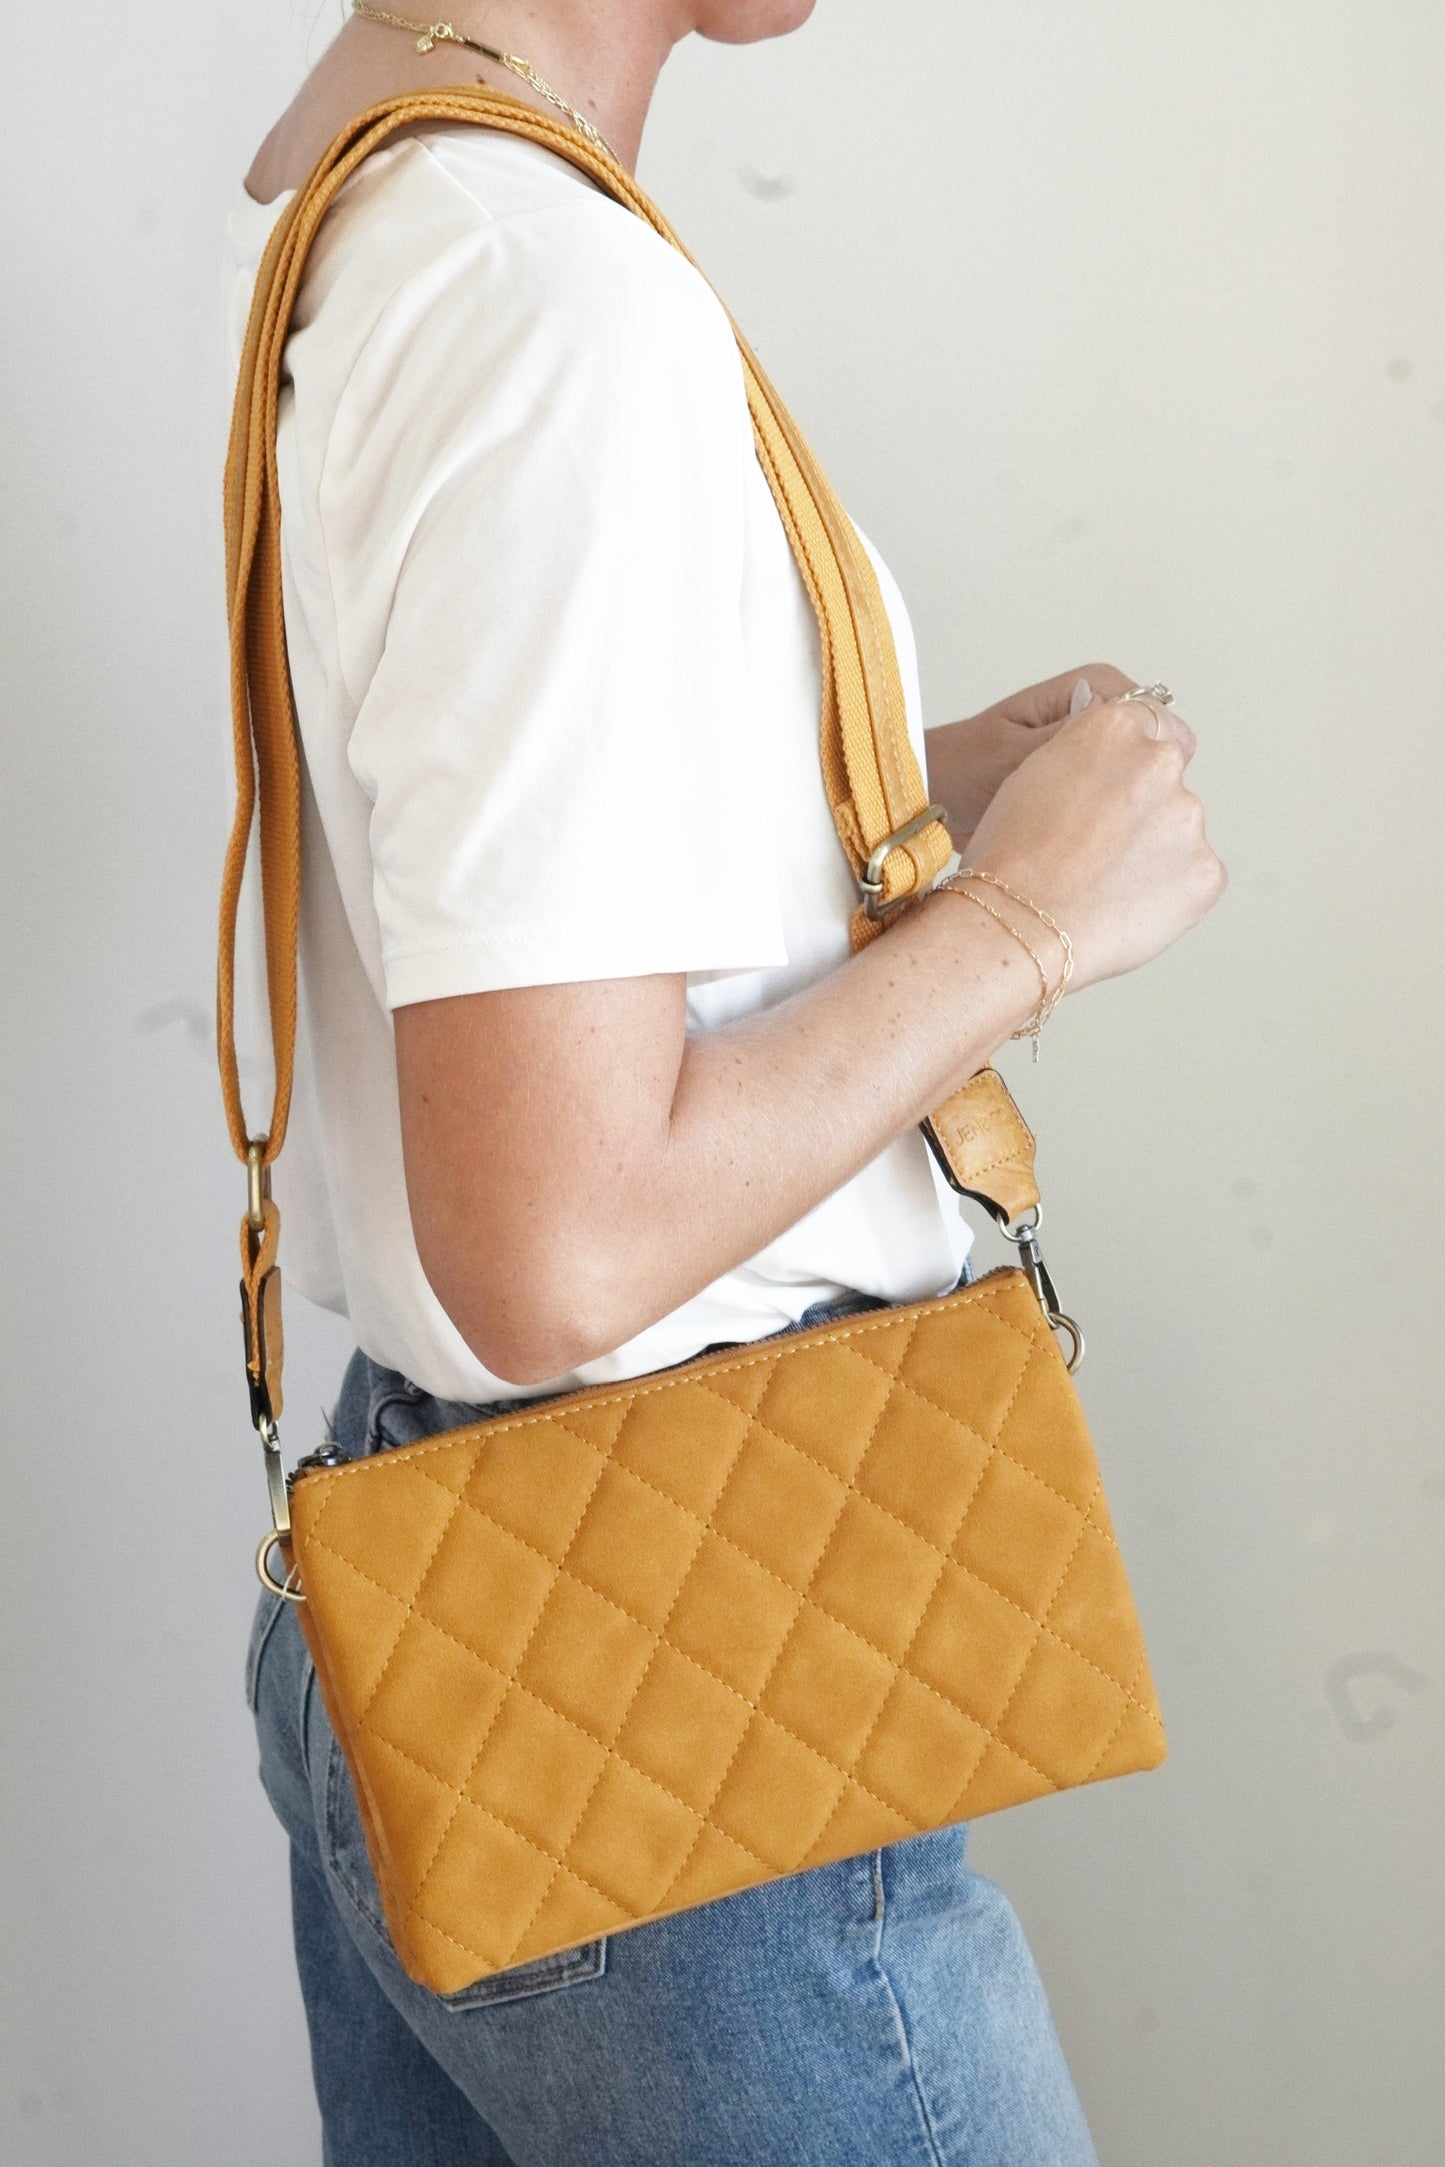 Izzy Quilted Oversized Crossbody Wallet Quilted Pattern Expandable Two Large Inner Pockets Middle Zipper Pocket Six Credit Card Slots Removeable Adjustable Guitar Strap and Wrist Strap Approx 10 in. x 6 1/2 in. x 1 1/2 in. Bottom expands to approx. 5 in. mustard color